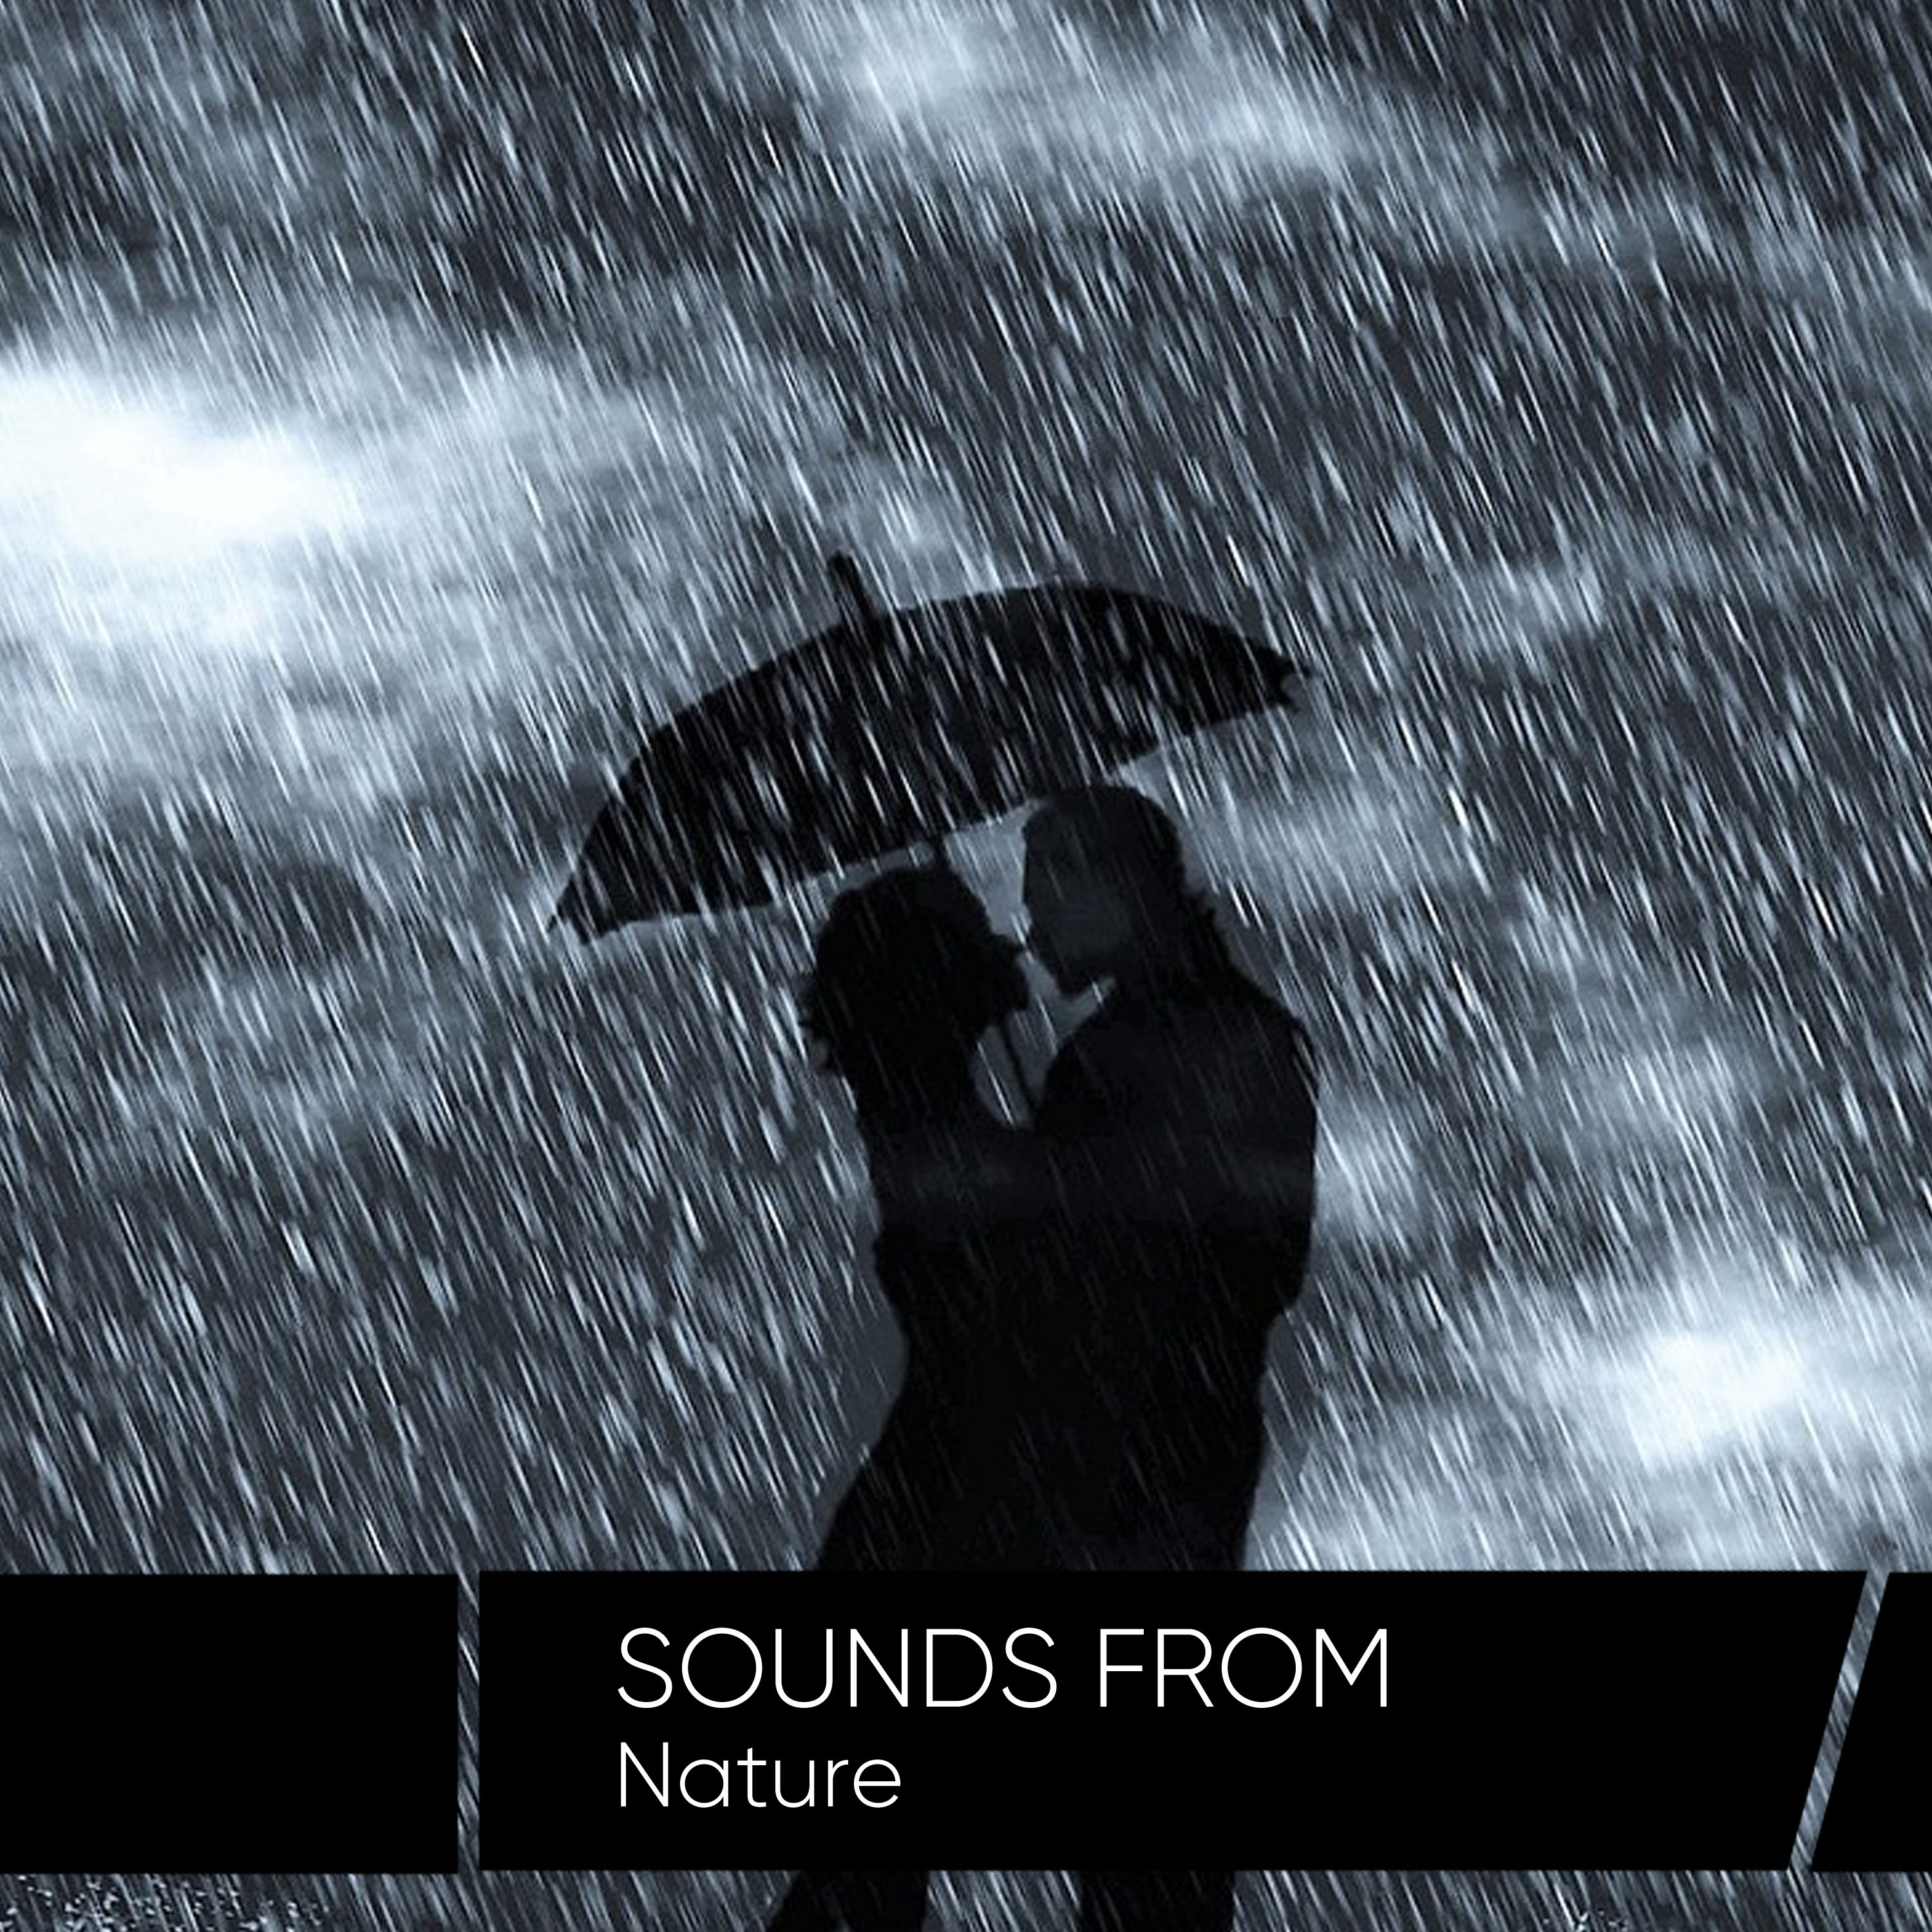 Sounds from Nature:Thunder and Lightening